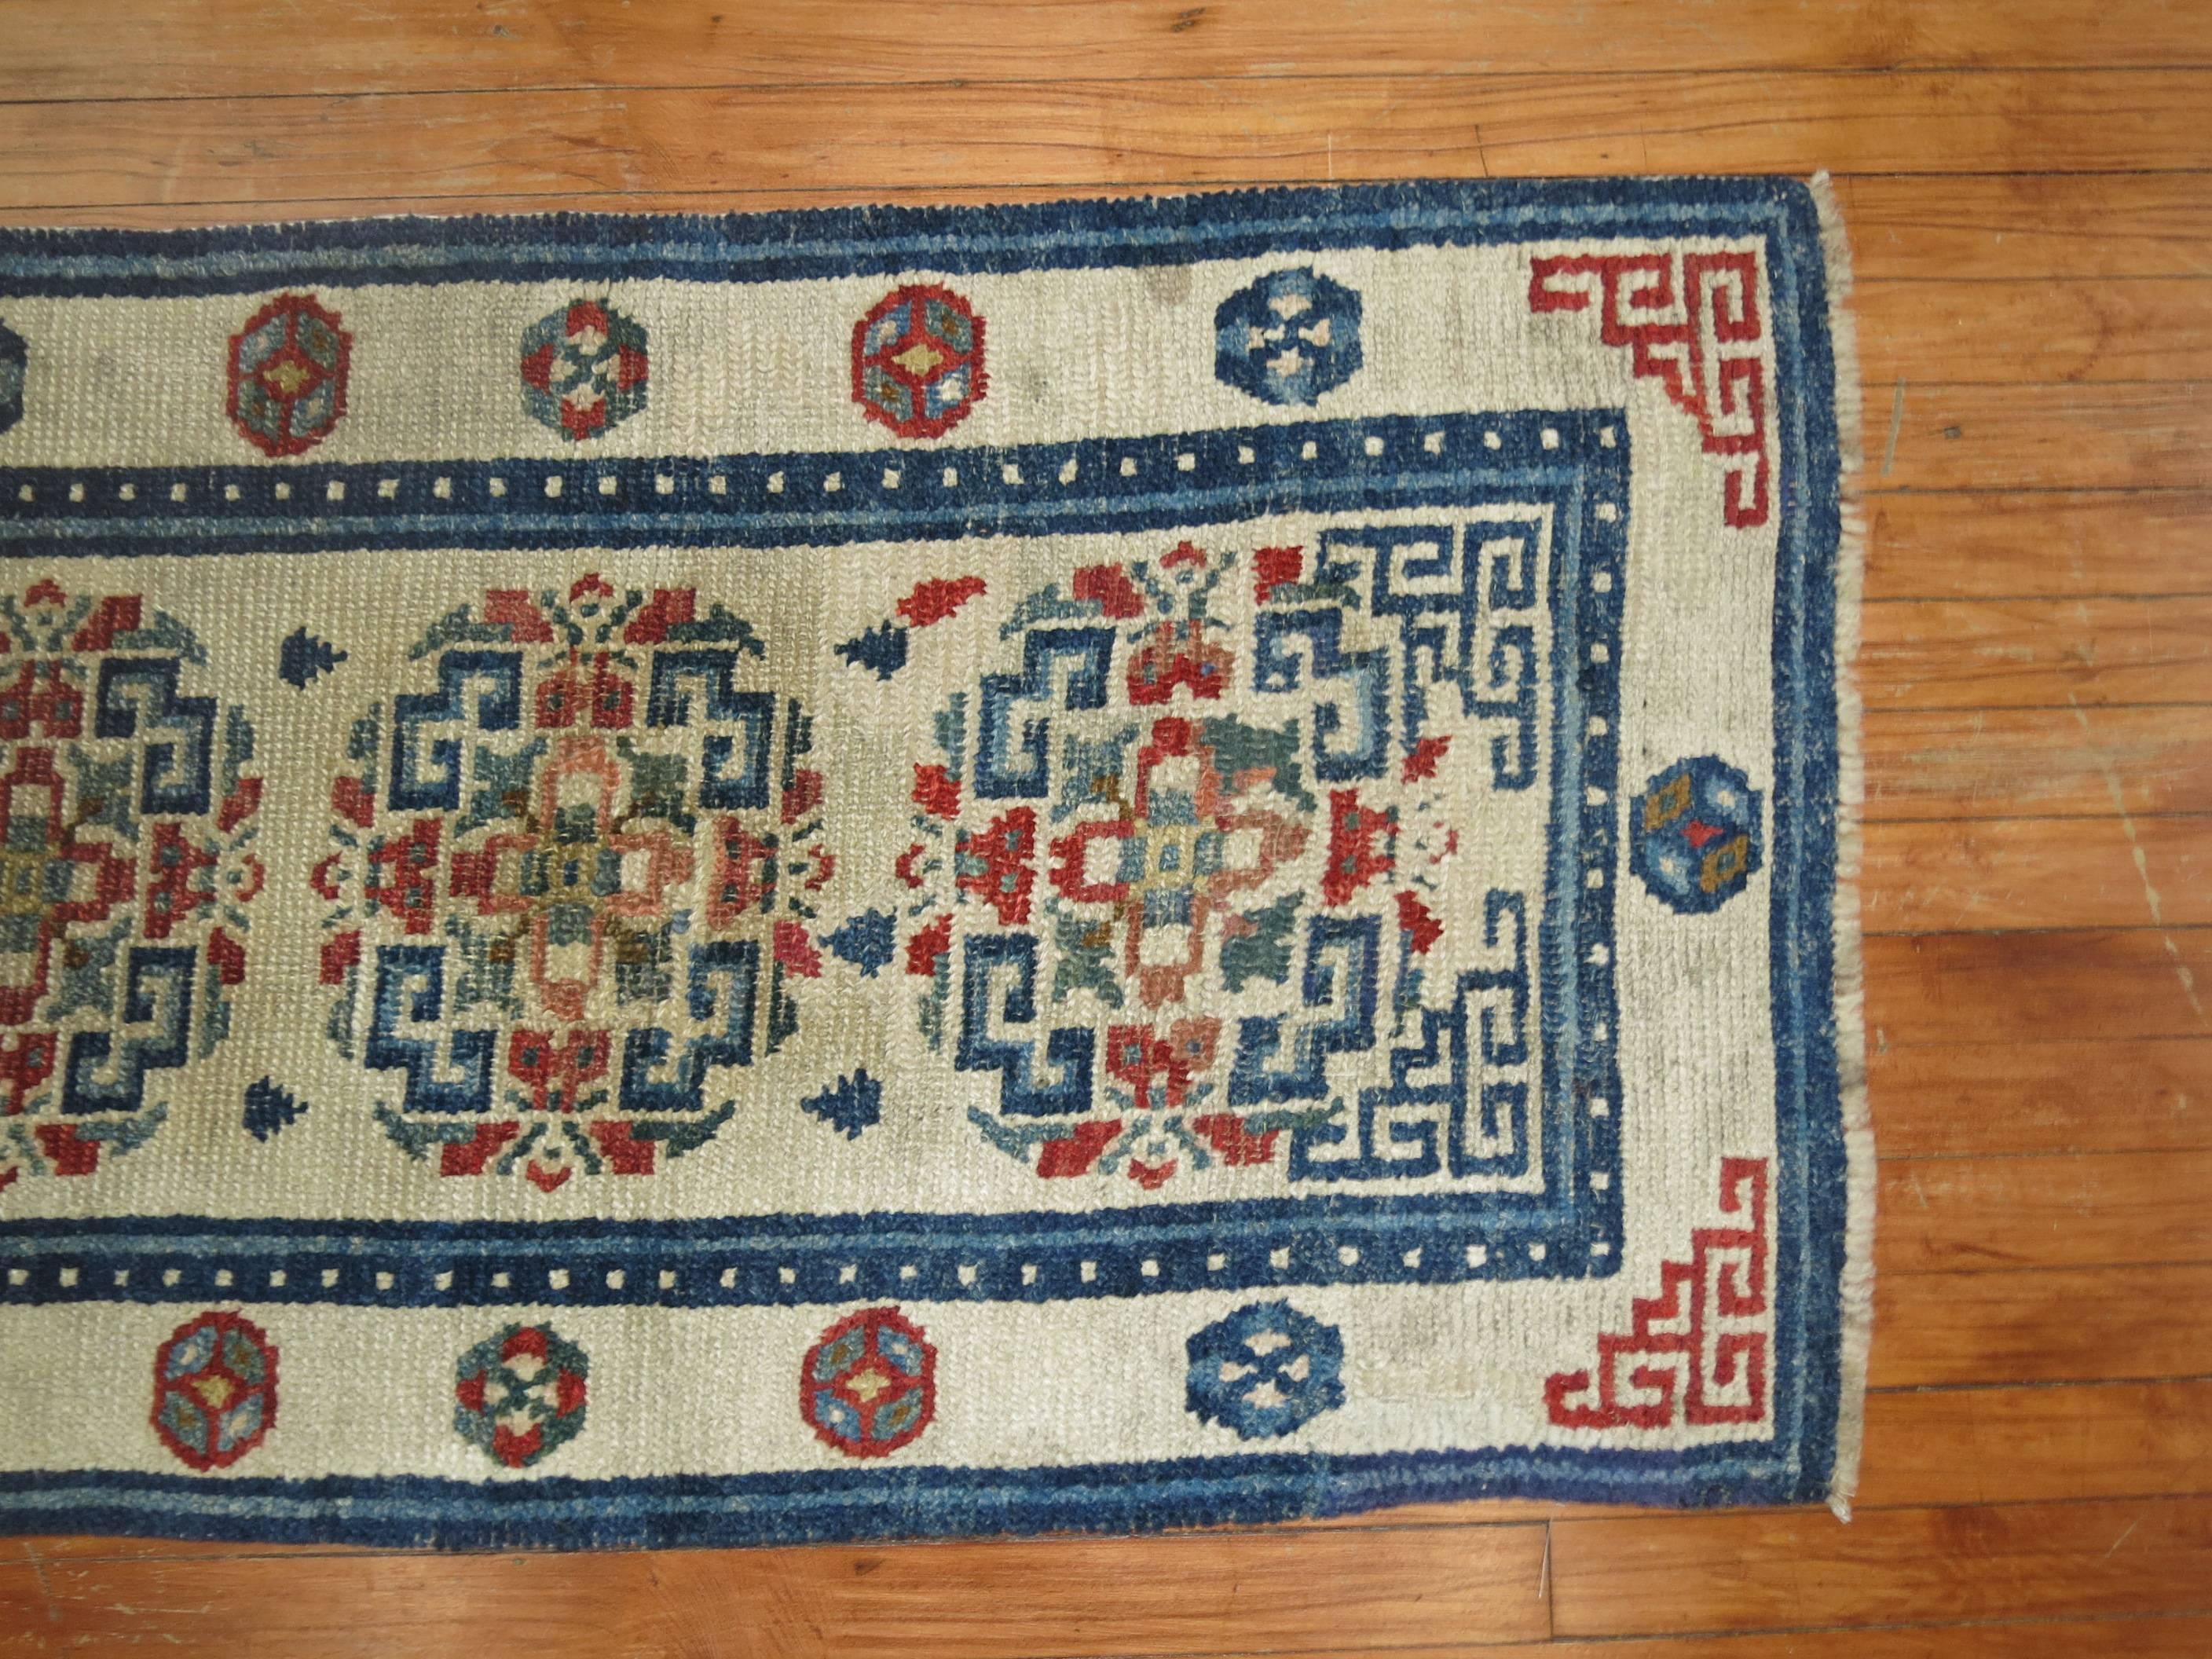 An early 20th century antique Tibetan rug in predominant white and blue accents.